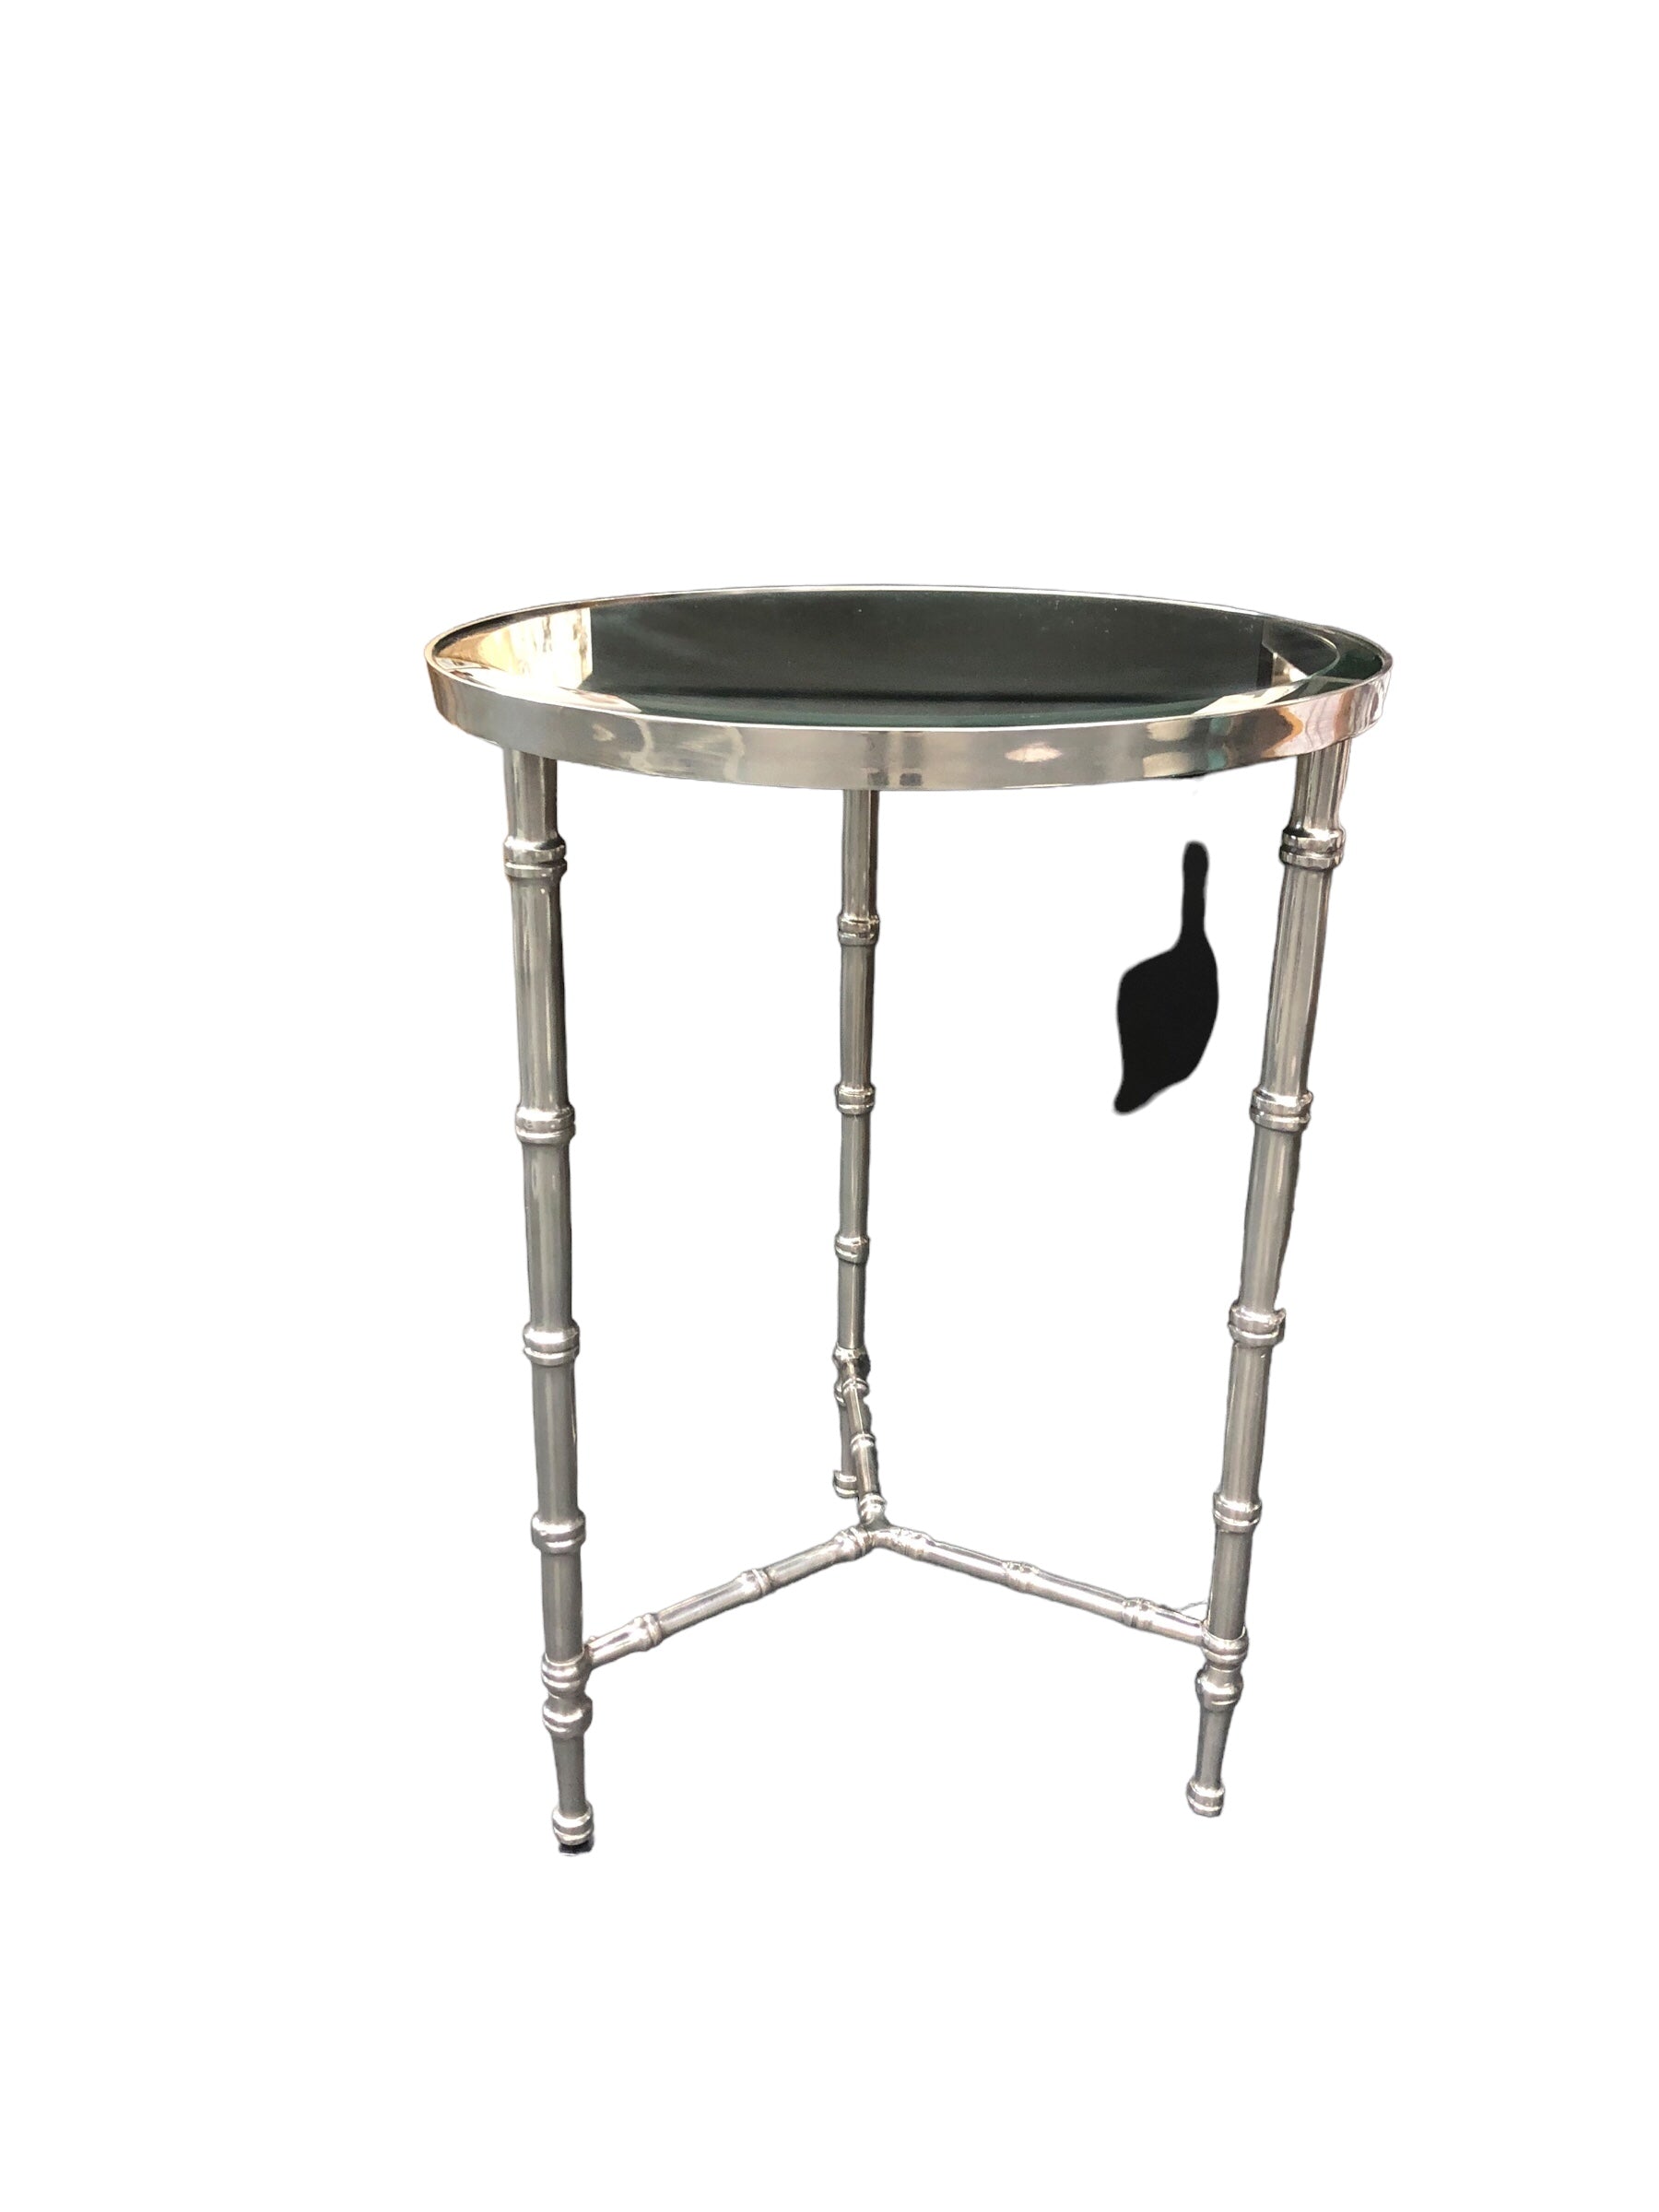 Siver and Mirror round side Table